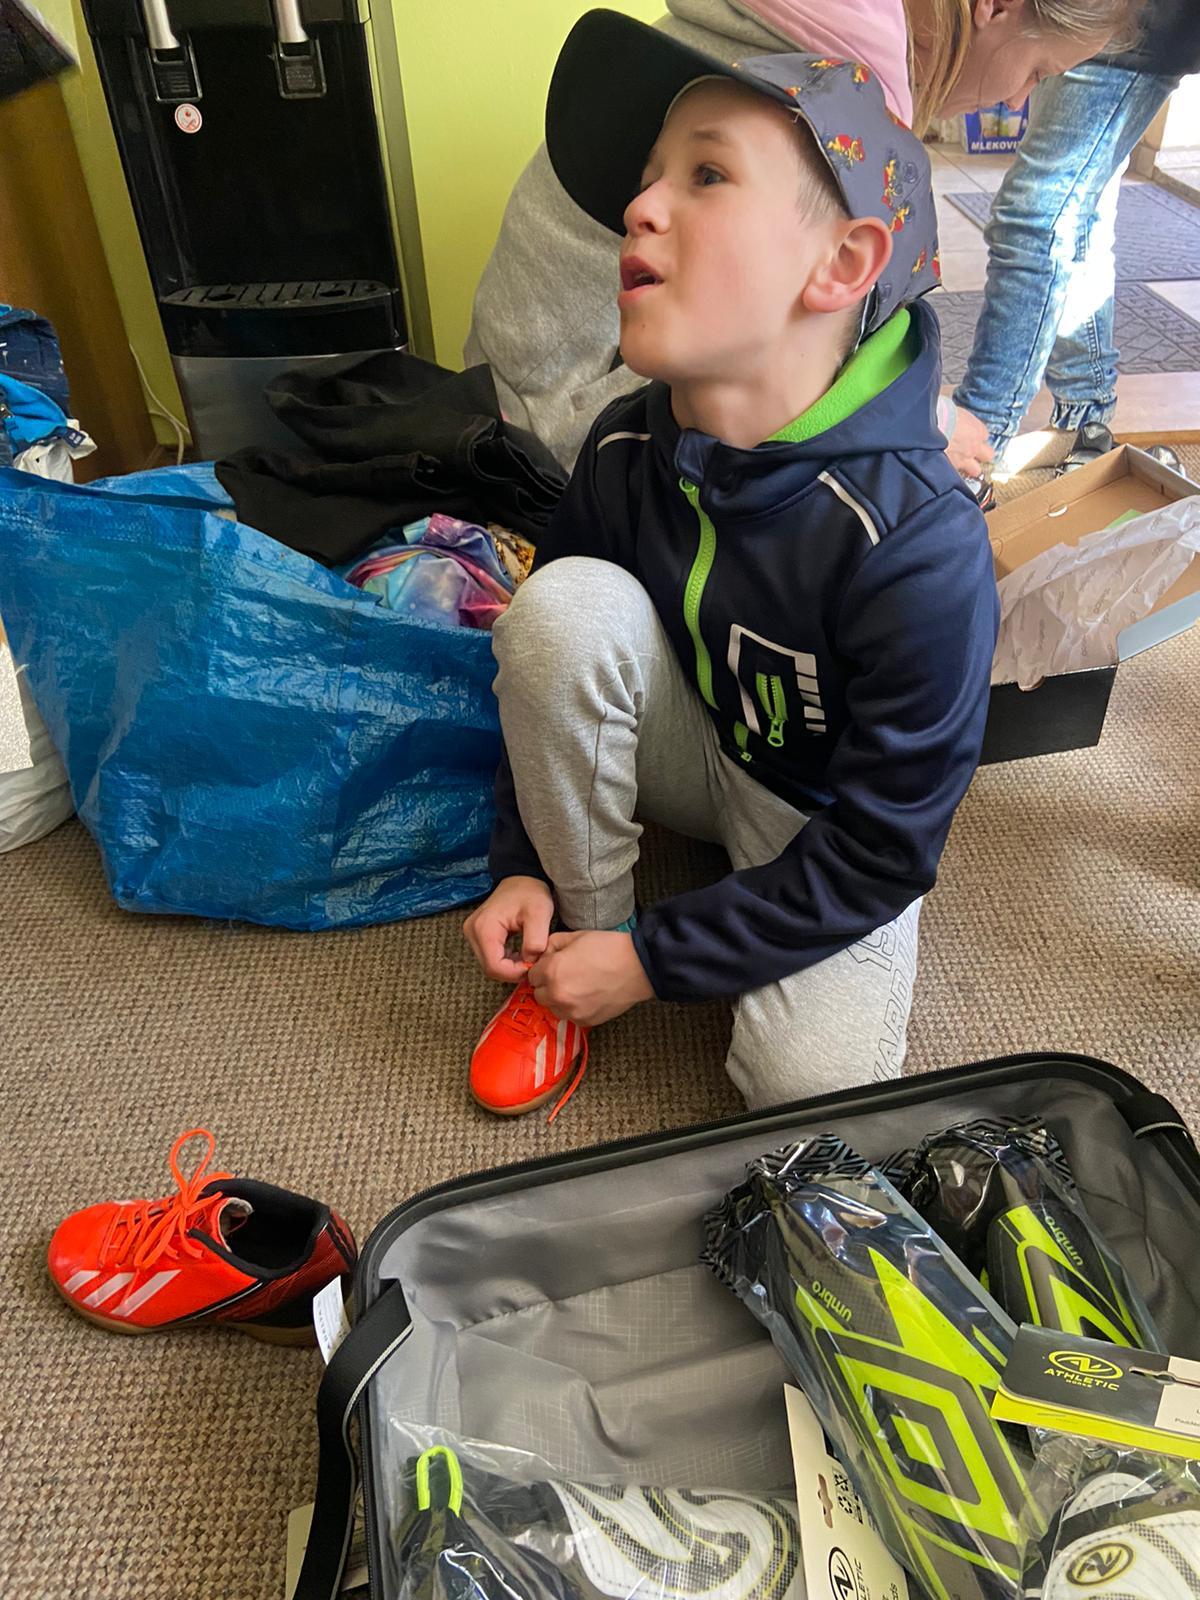 A Ukranian boy gets fitted for soccer cleats that the Haneys brought over.